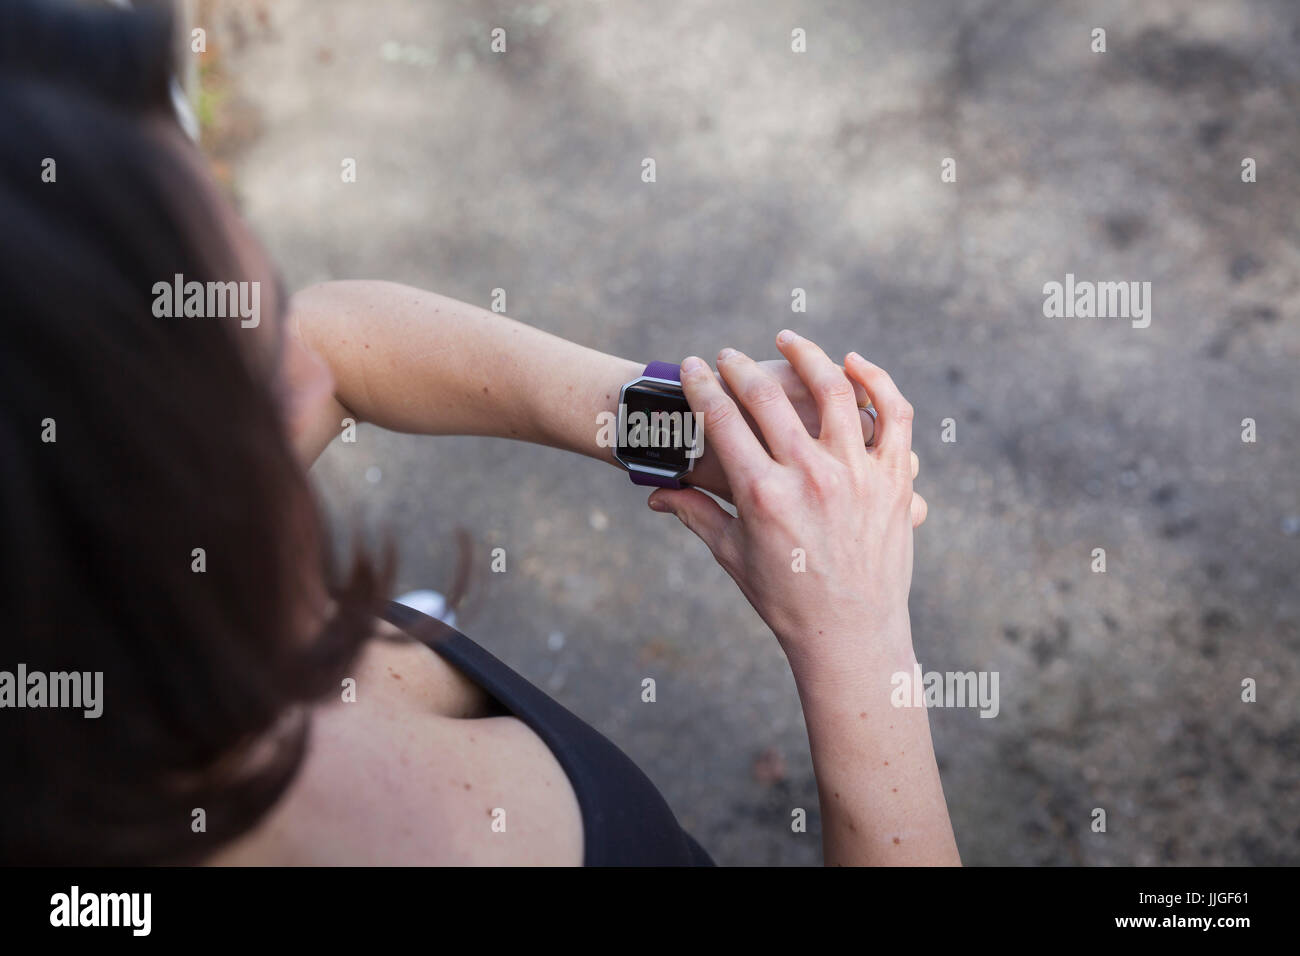 Woman checking her Fit Bit fitness tracker watch on her wrist. Stock Photo